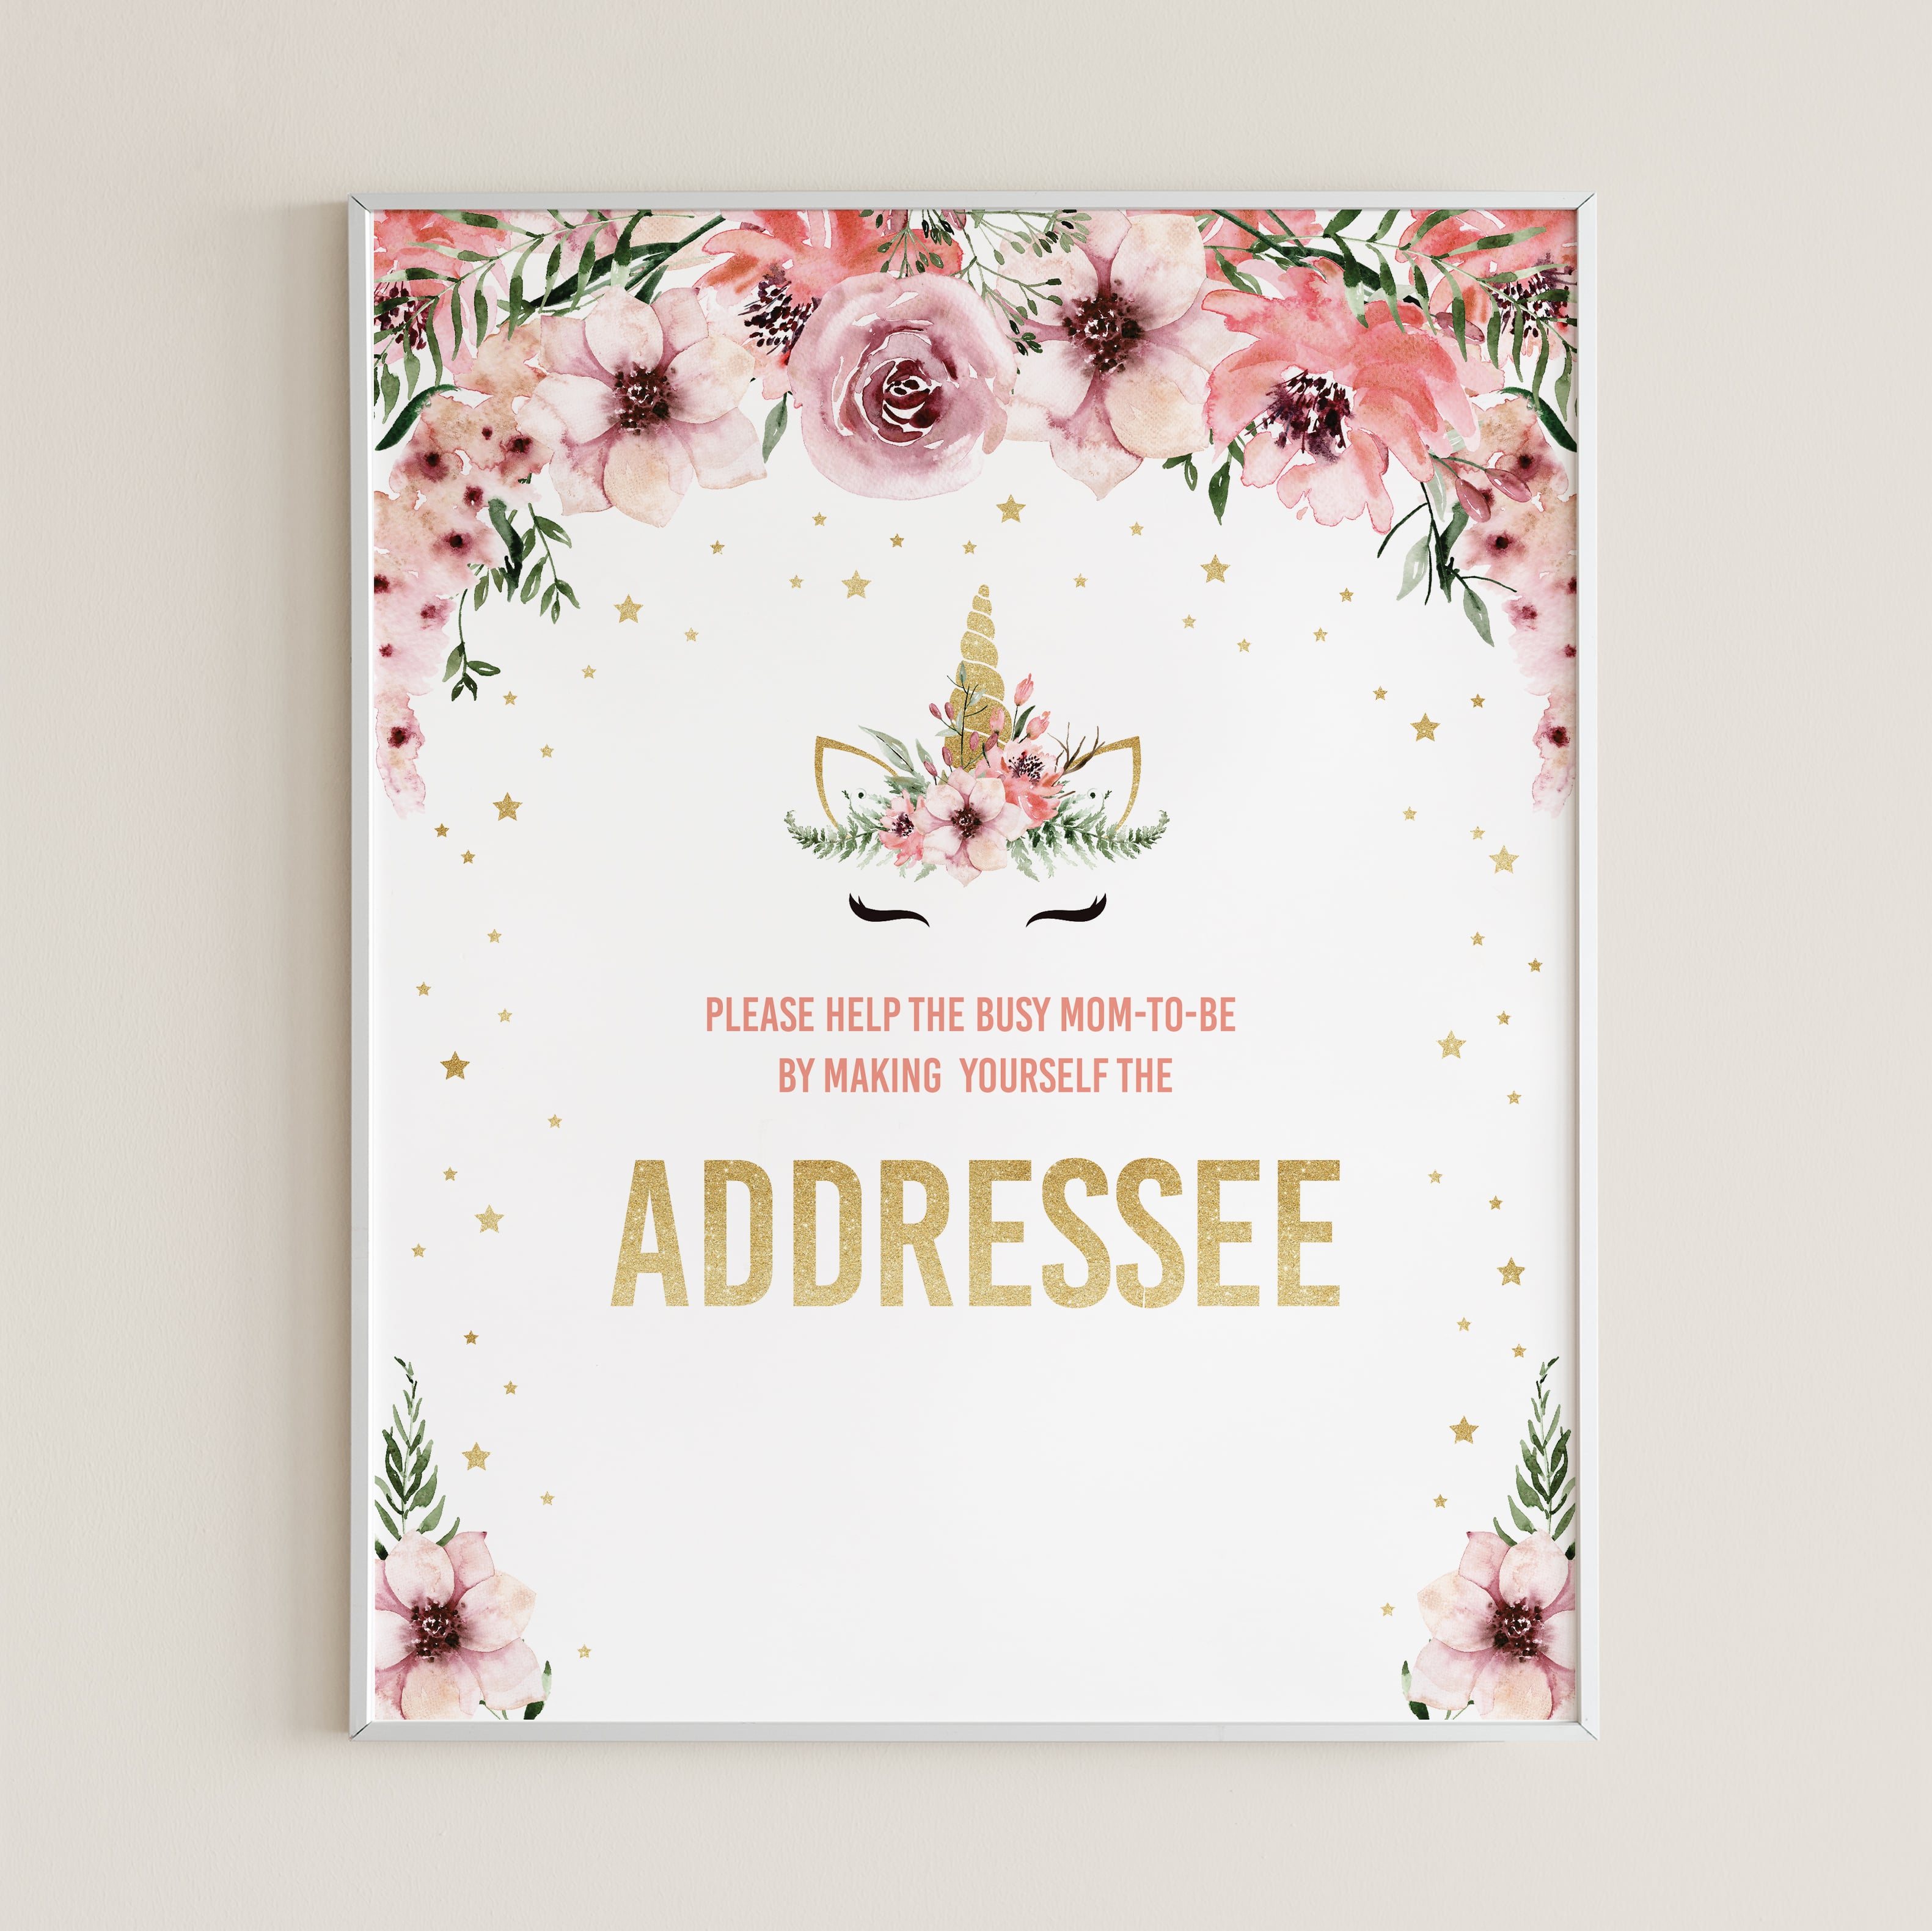 Adress an envelope sign for girl baby shower download by LittleSizzle